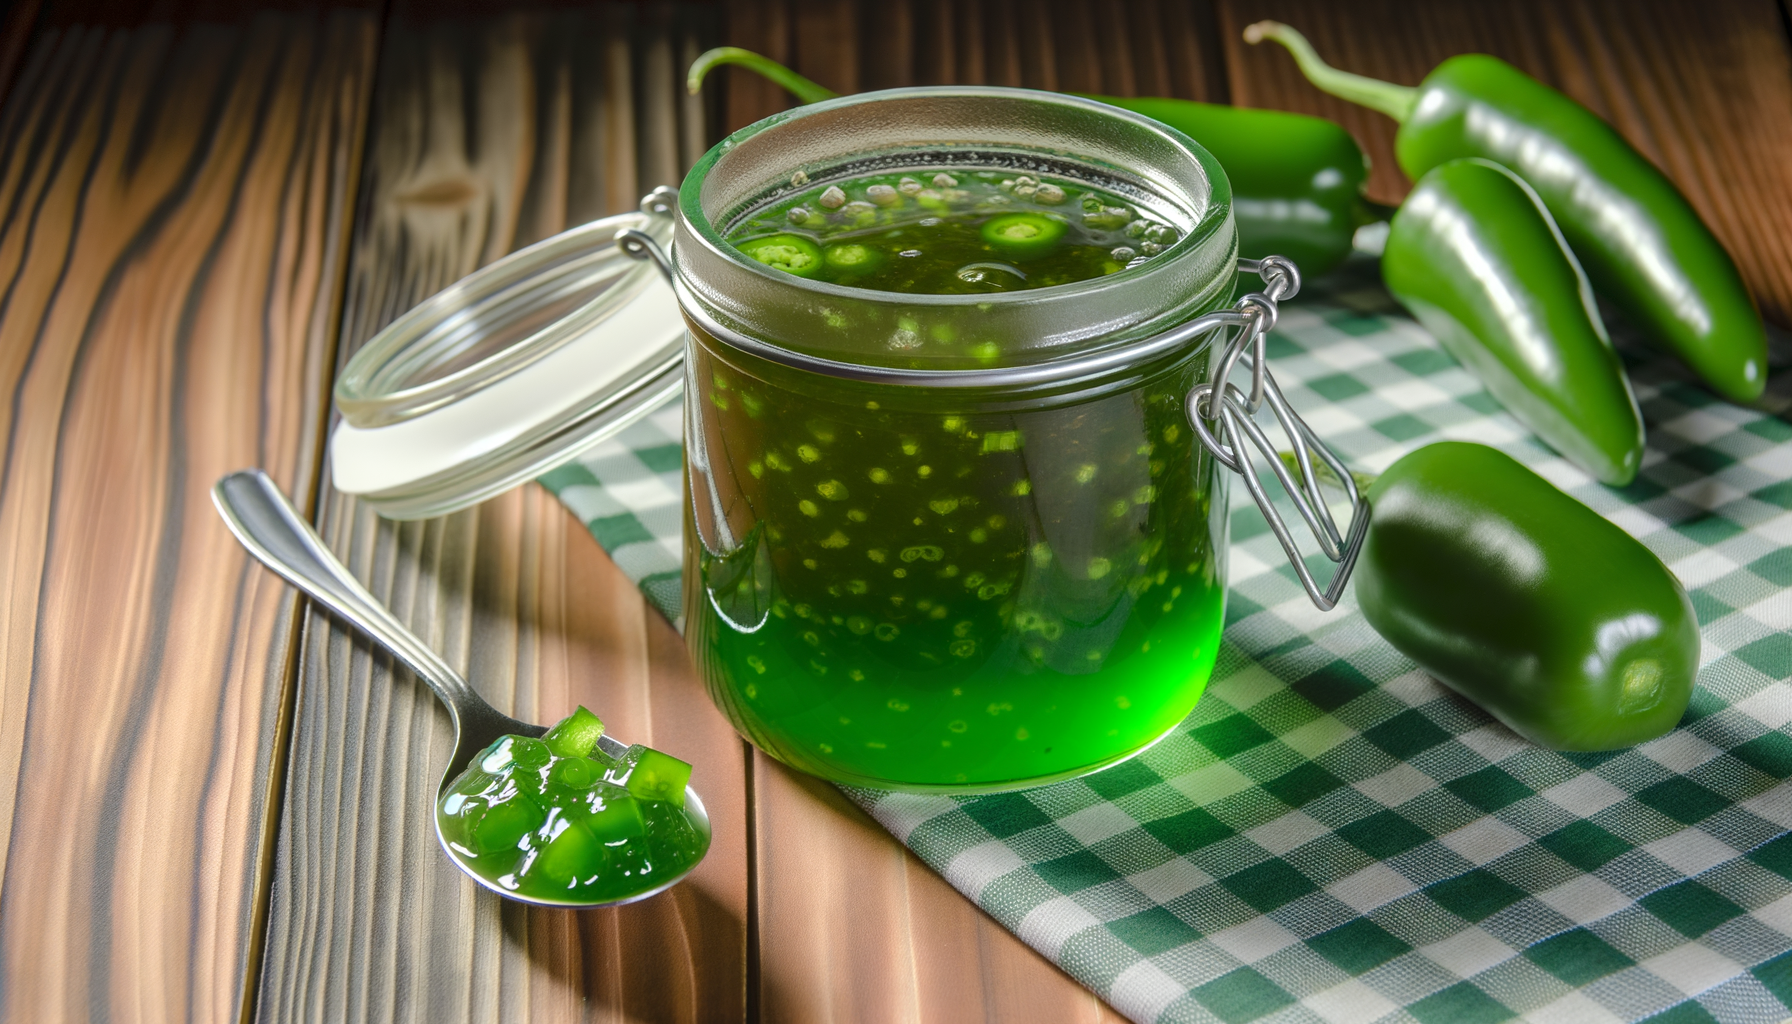 Vibrant Texas Jalapeno Jelly in a glass jar, showcasing a gleaming green hue, indicative of its spicy, flavorsome kick.